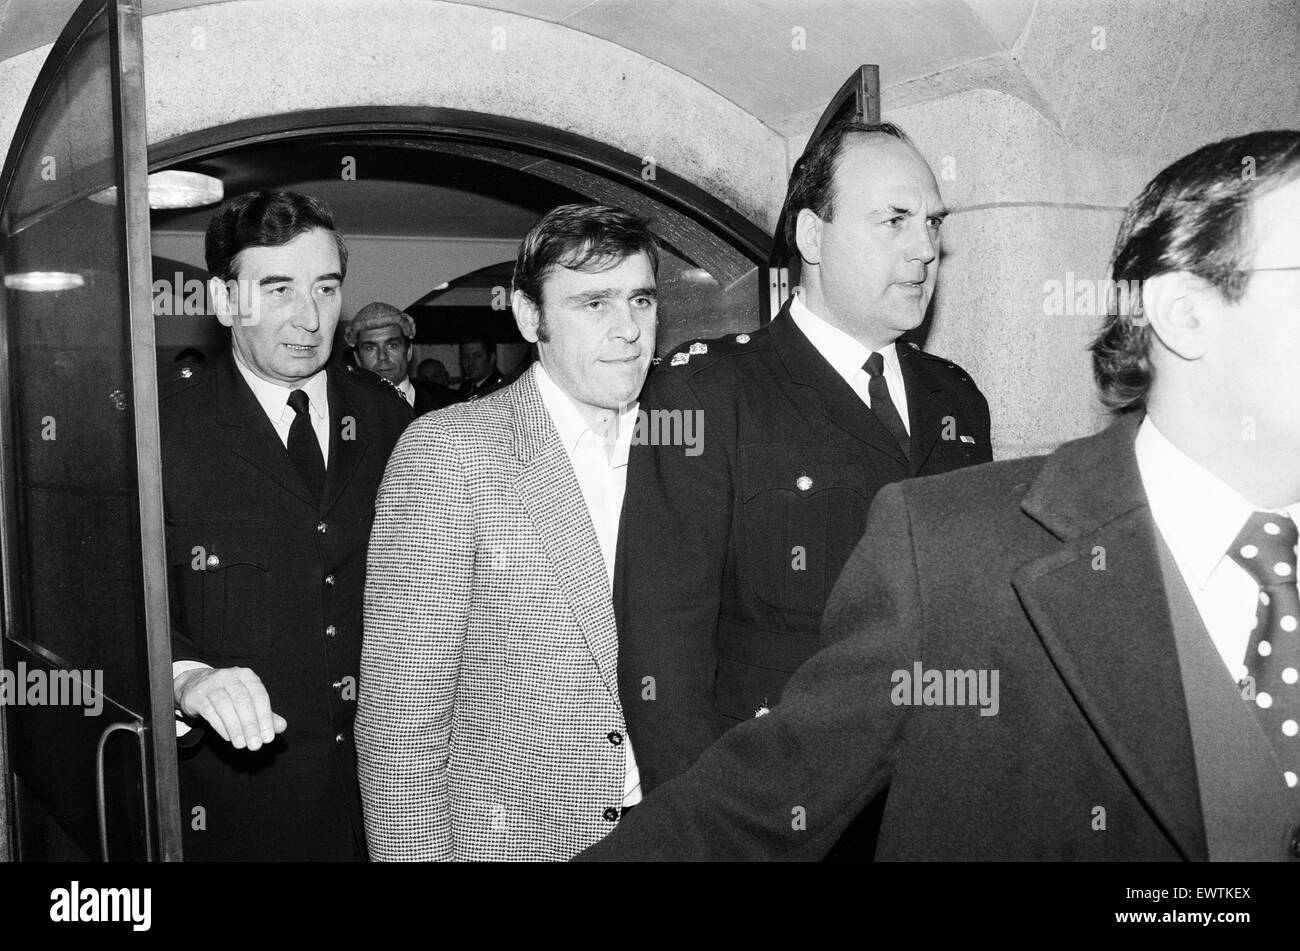 Leonard Thompson acquitted of murder charge. Henry McKenny Murder Trial at Old Bailey, London, 28th November 1980. Stock Photo